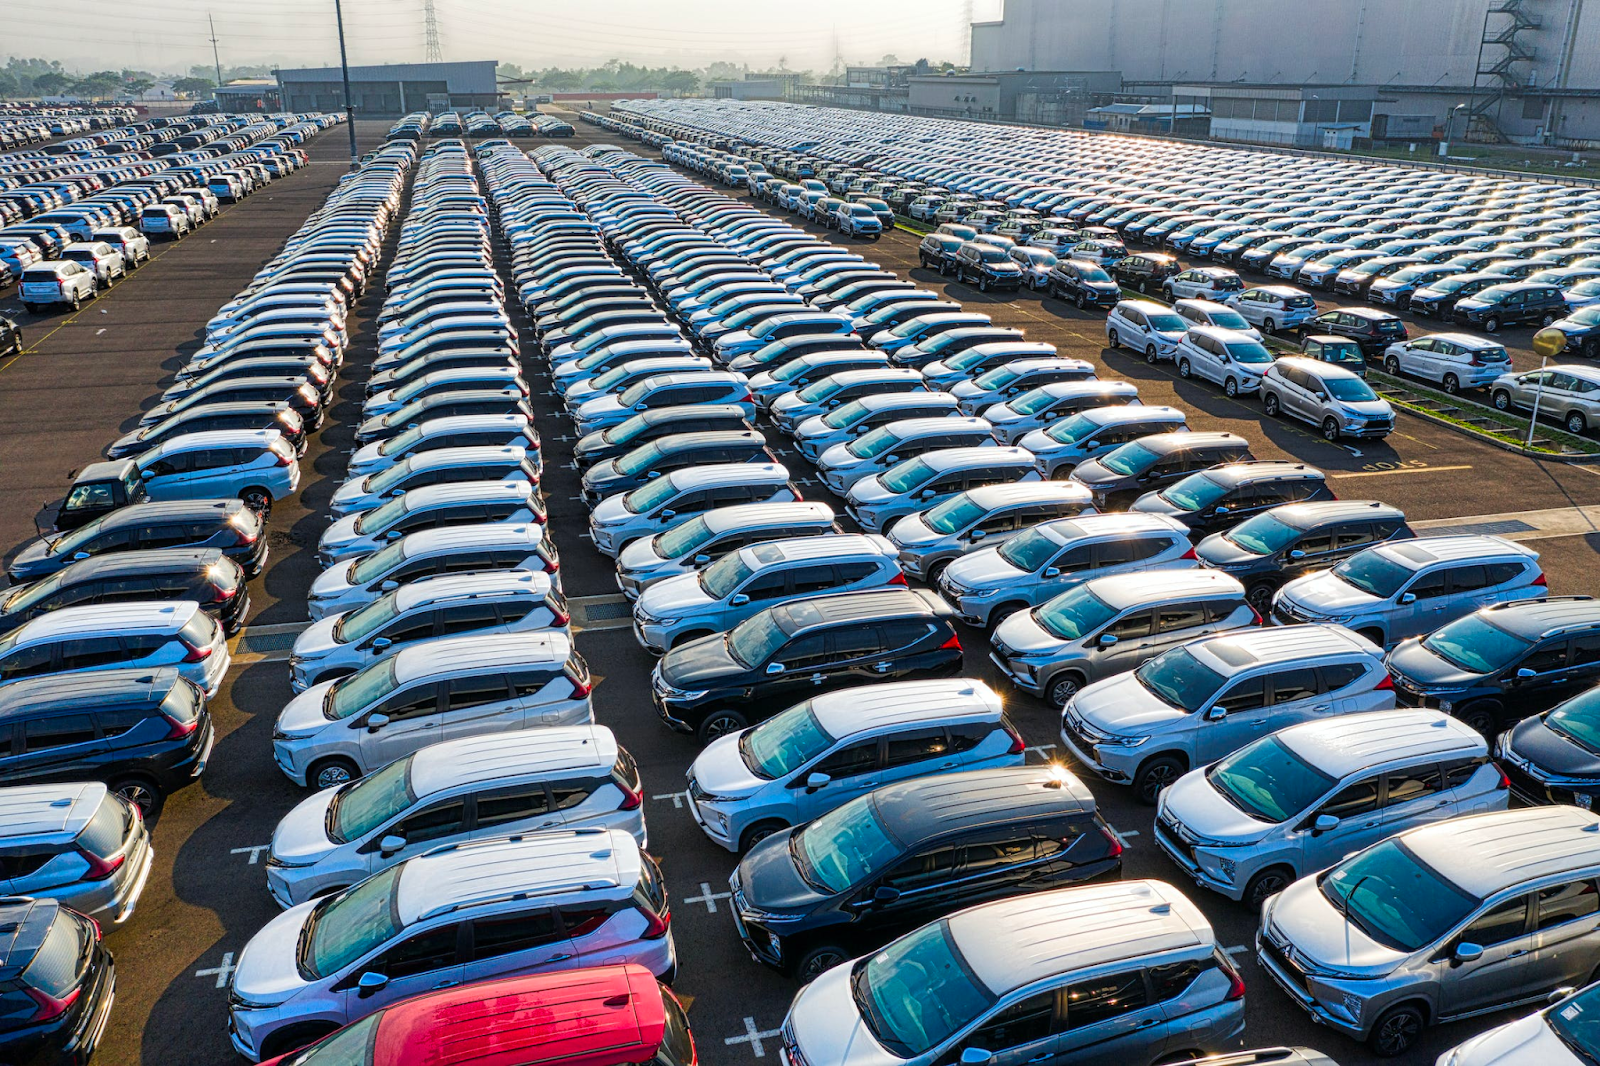  rows-of-expensive-modern-cars-on-asphalt-parking-of-manufacture